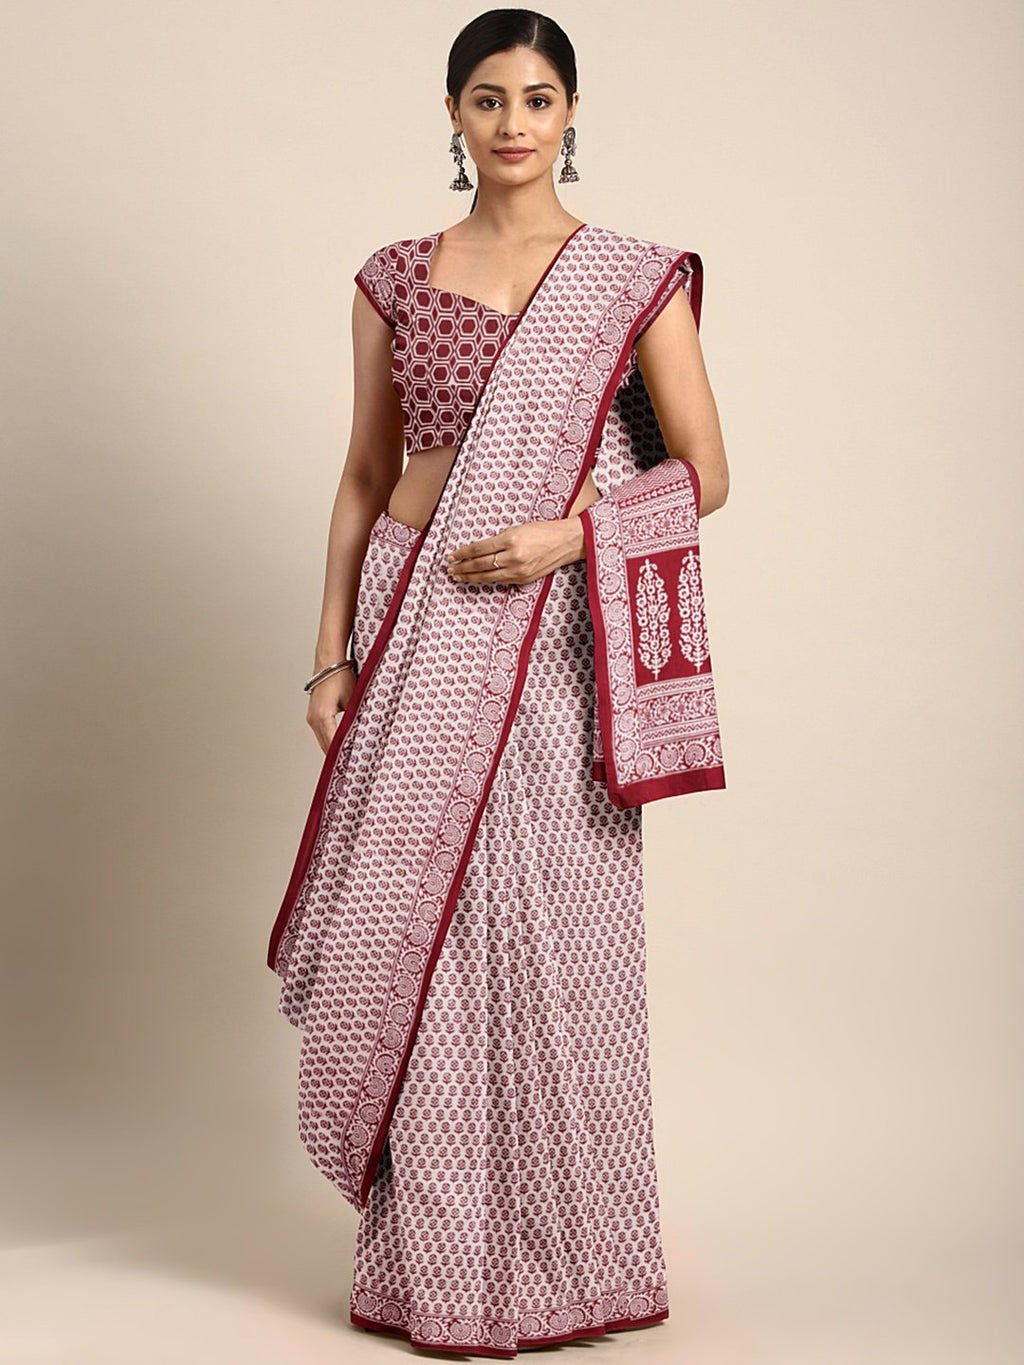 Off-White Maroon Pure Cotton Handblock Print Bagh Saree-Saree-Kalakari India-MRBASA0010-Bagh, Cotton, Geographical Indication, Hand Blocks, Hand Crafted, Heritage Prints, Natural Dyes, Sarees, Sustainable Fabrics-[Linen,Ethnic,wear,Fashionista,Handloom,Handicraft,Indigo,blockprint,block,print,Cotton,Chanderi,Blue, latest,classy,party,bollywood,trendy,summer,style,traditional,formal,elegant,unique,style,hand,block,print, dabu,booti,gift,present,glamorous,affordable,collectible,Sari,Saree,printed,